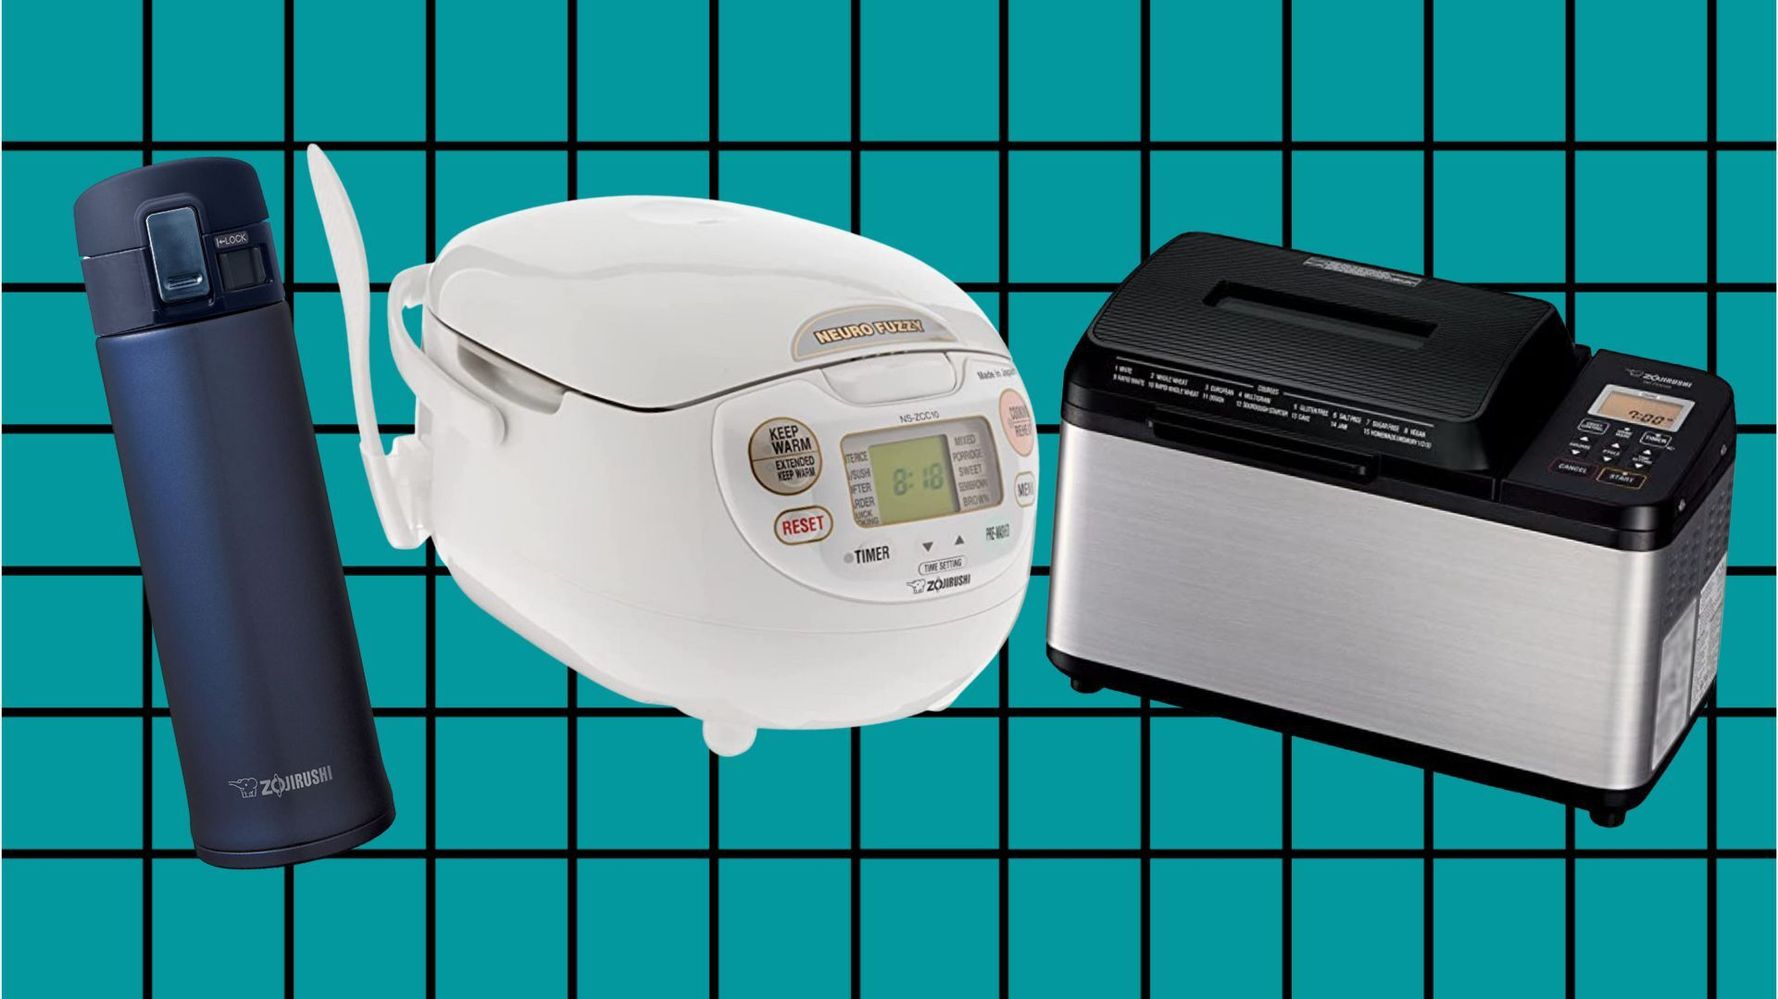 Prime Day 2021: The best rice cooker we've tried just got a big price cut